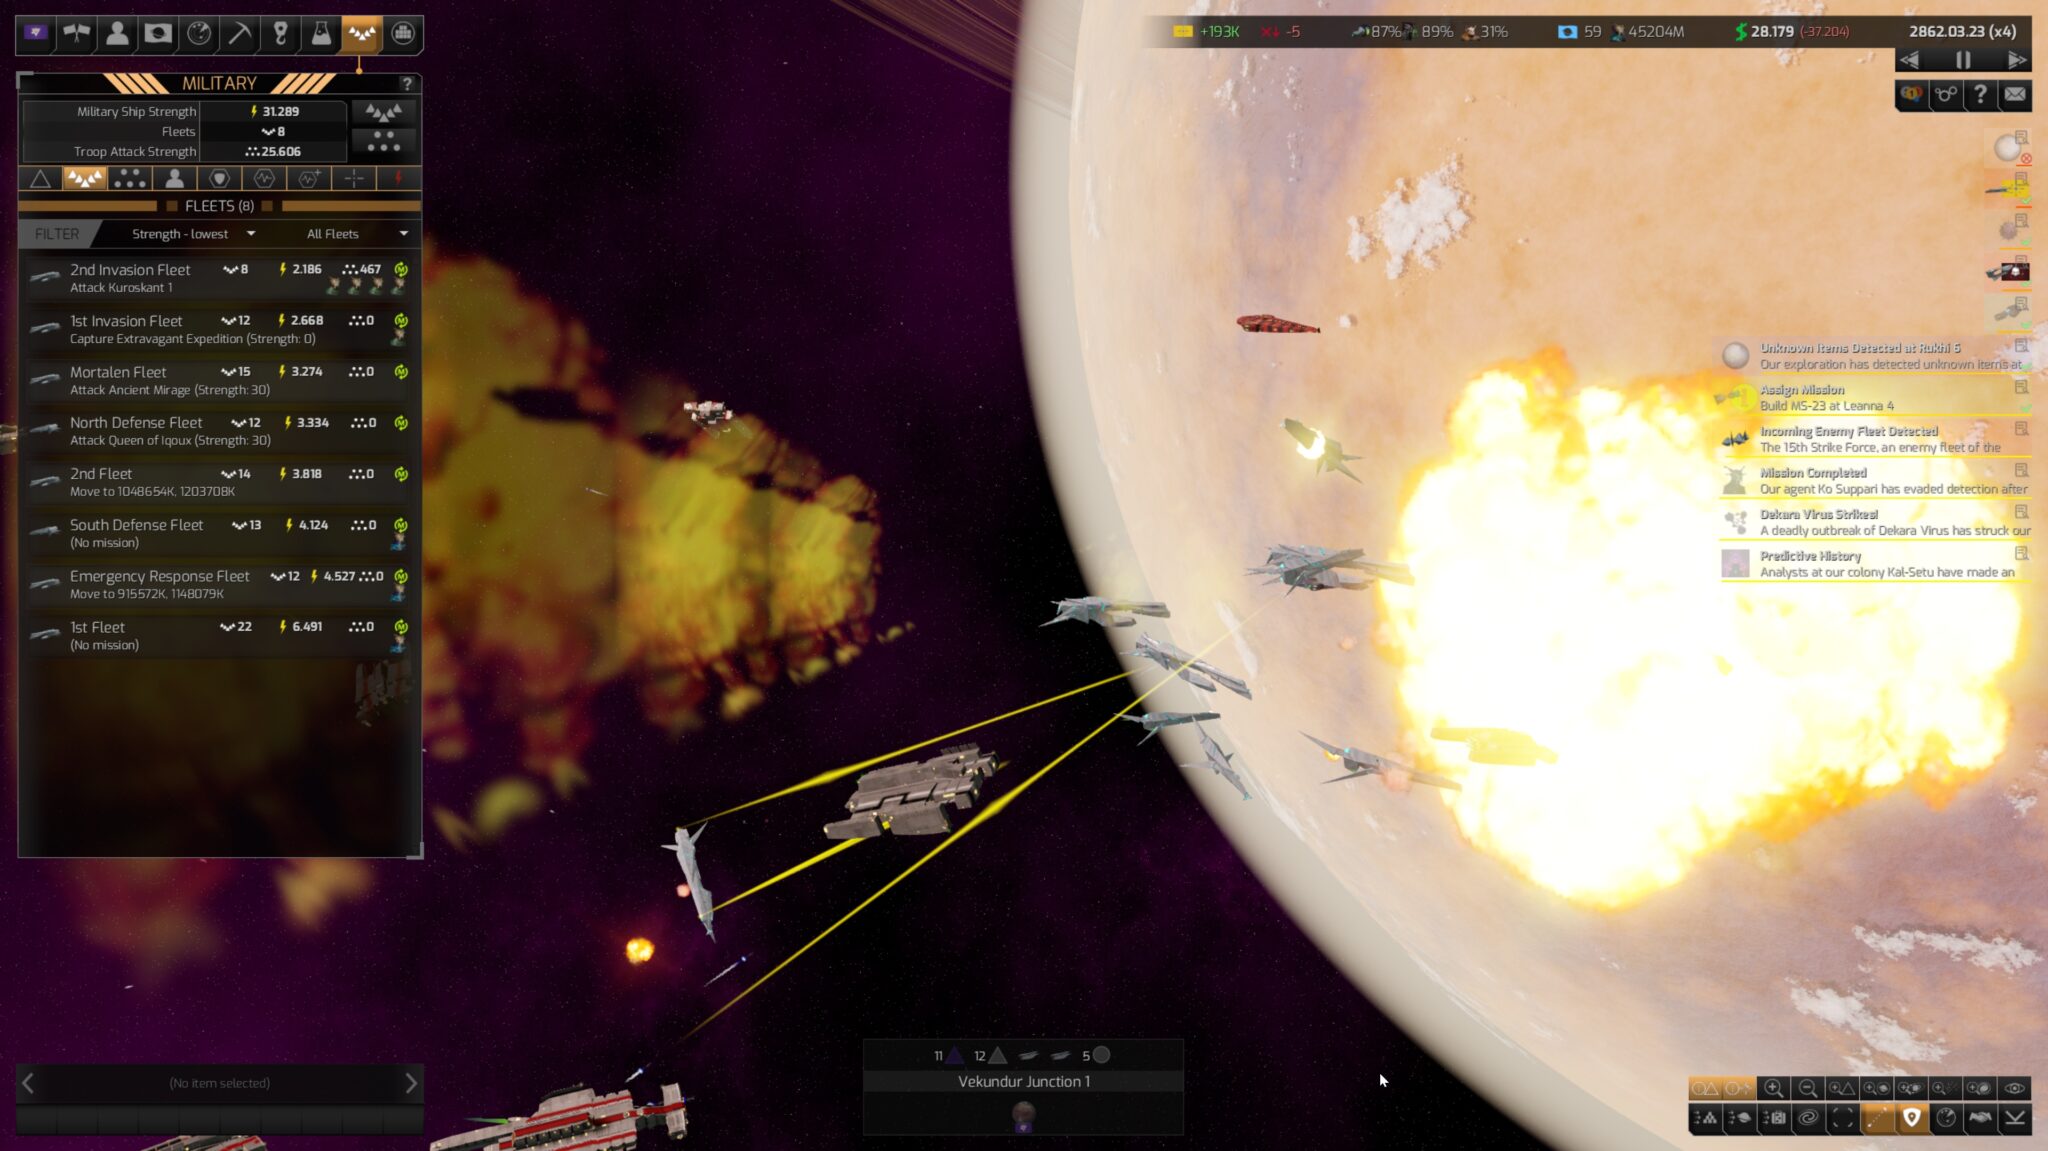 I specifically shoot down the enemy transport ships to prevent a ground invasion. The explosion effects are, well, expedient.